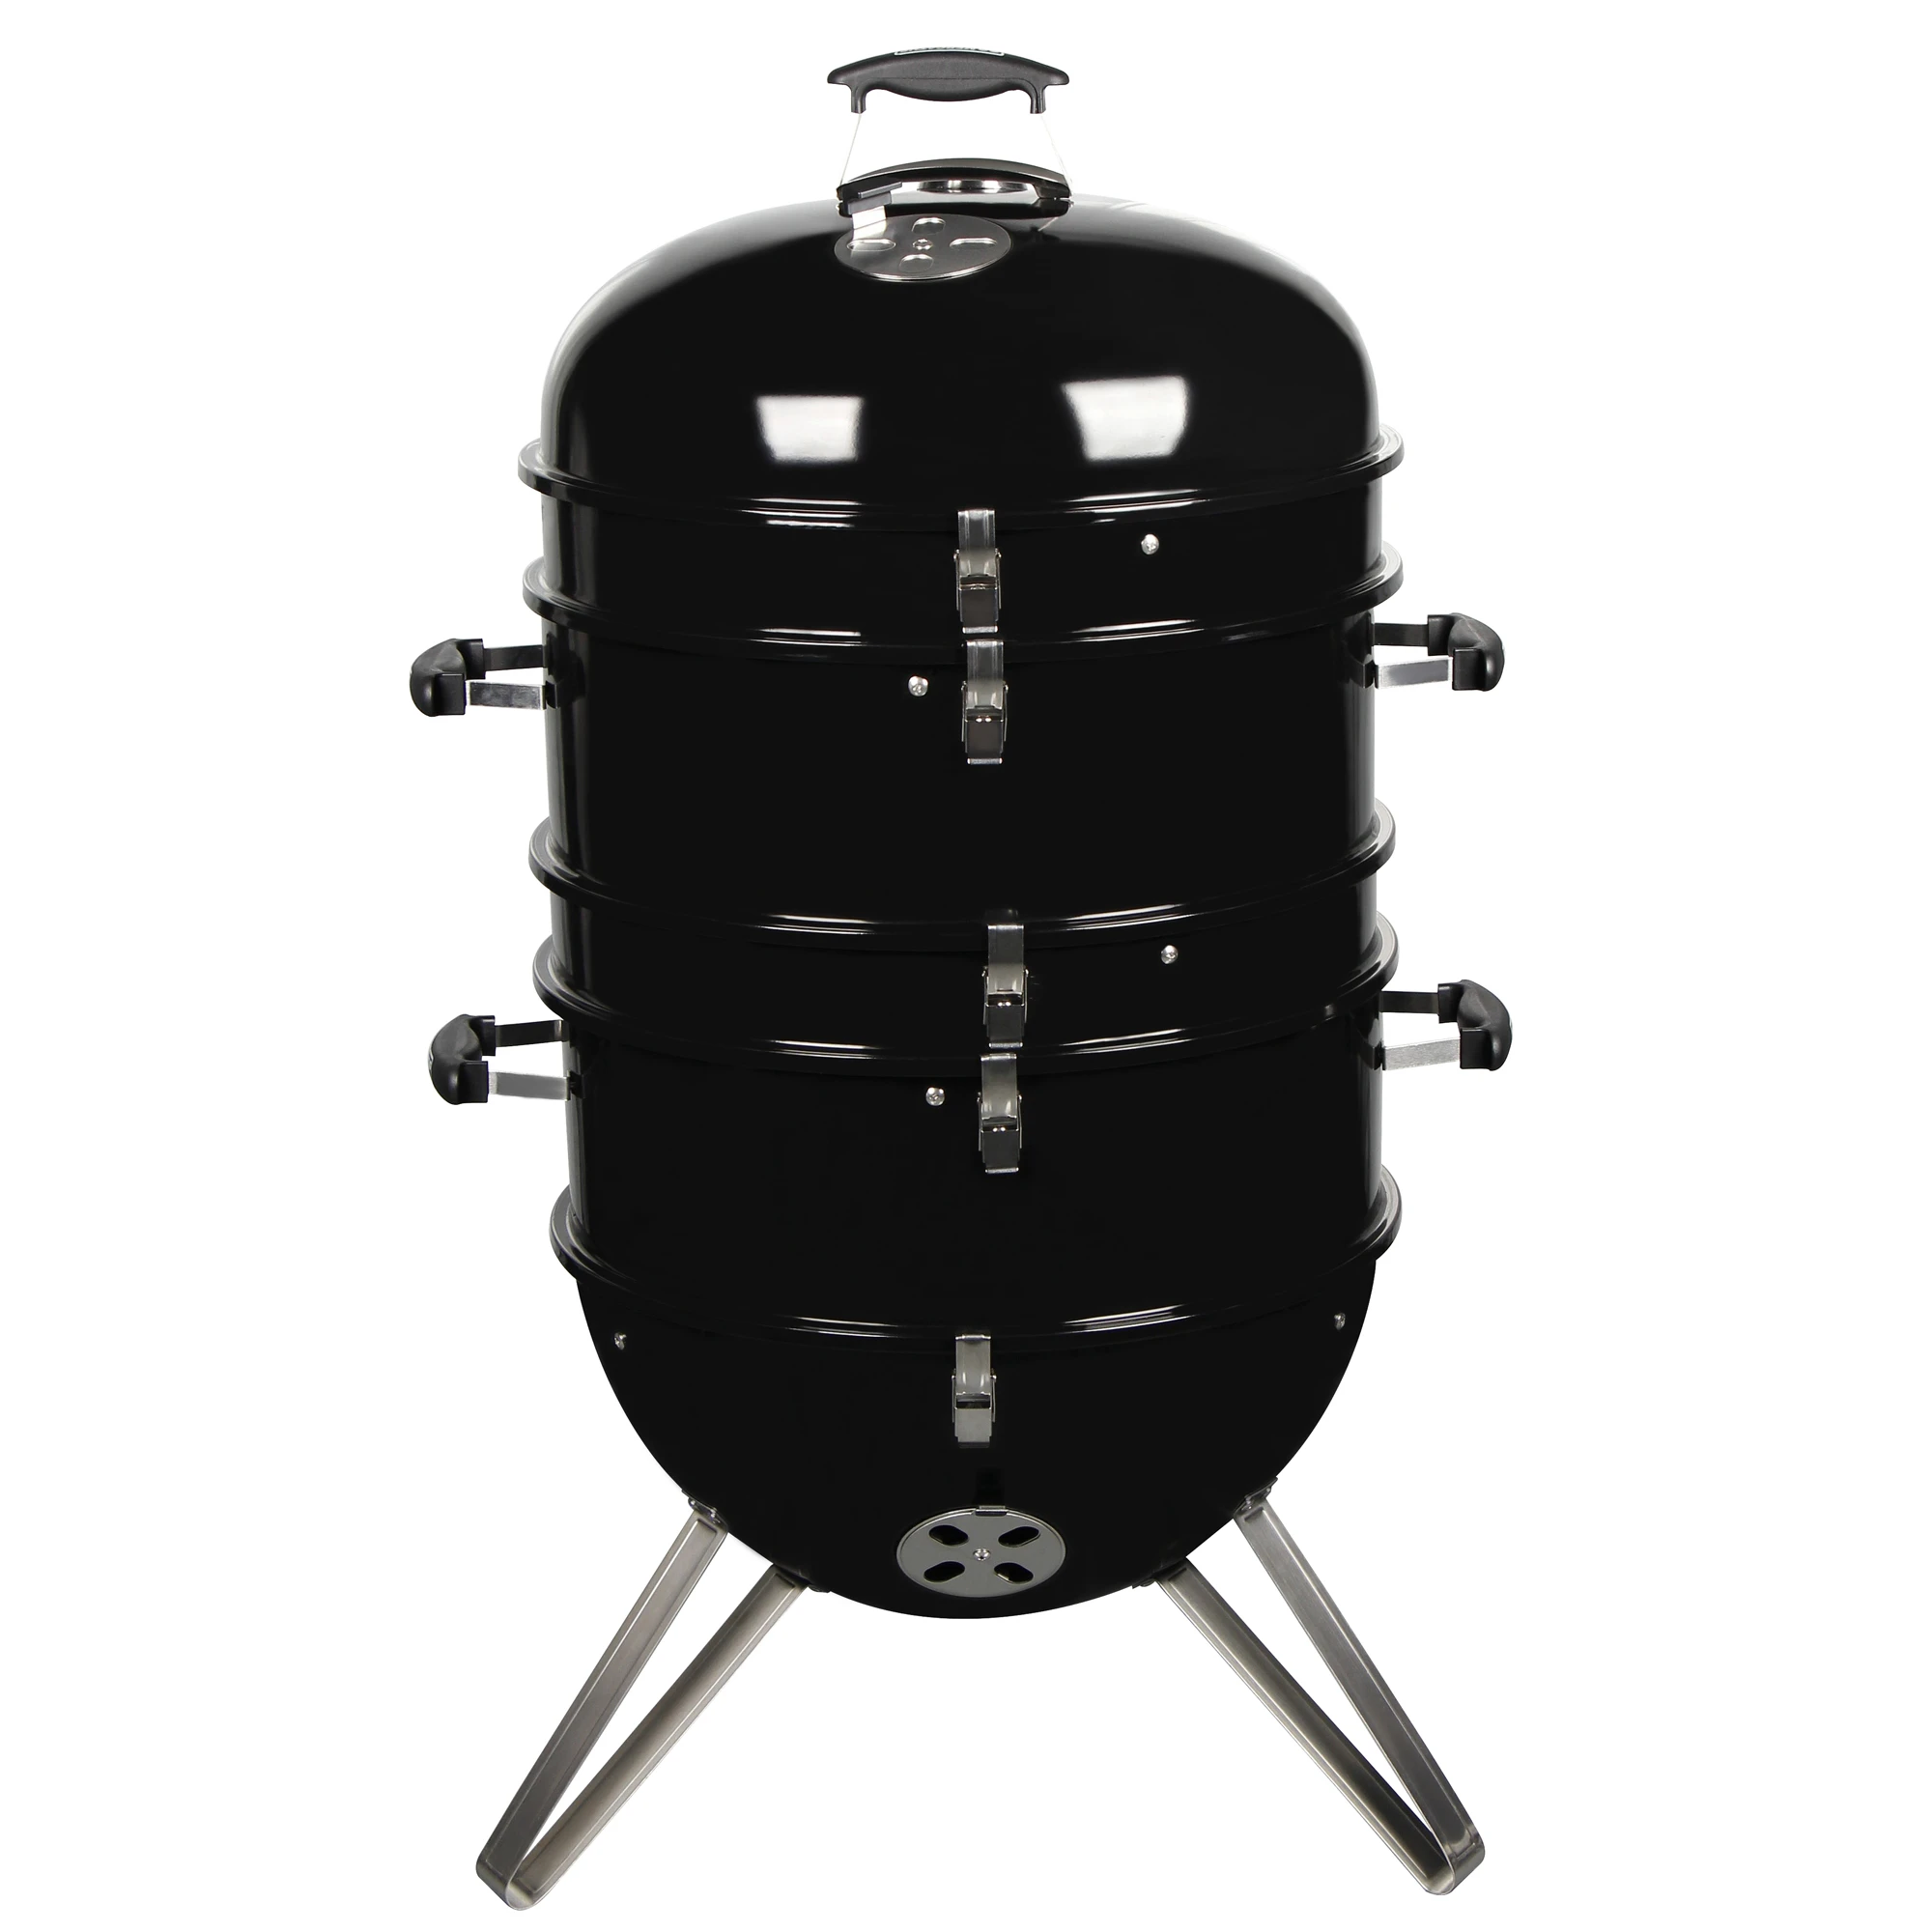 Barbecue Charcoal Smoker Original Manufacture and Competitive Price